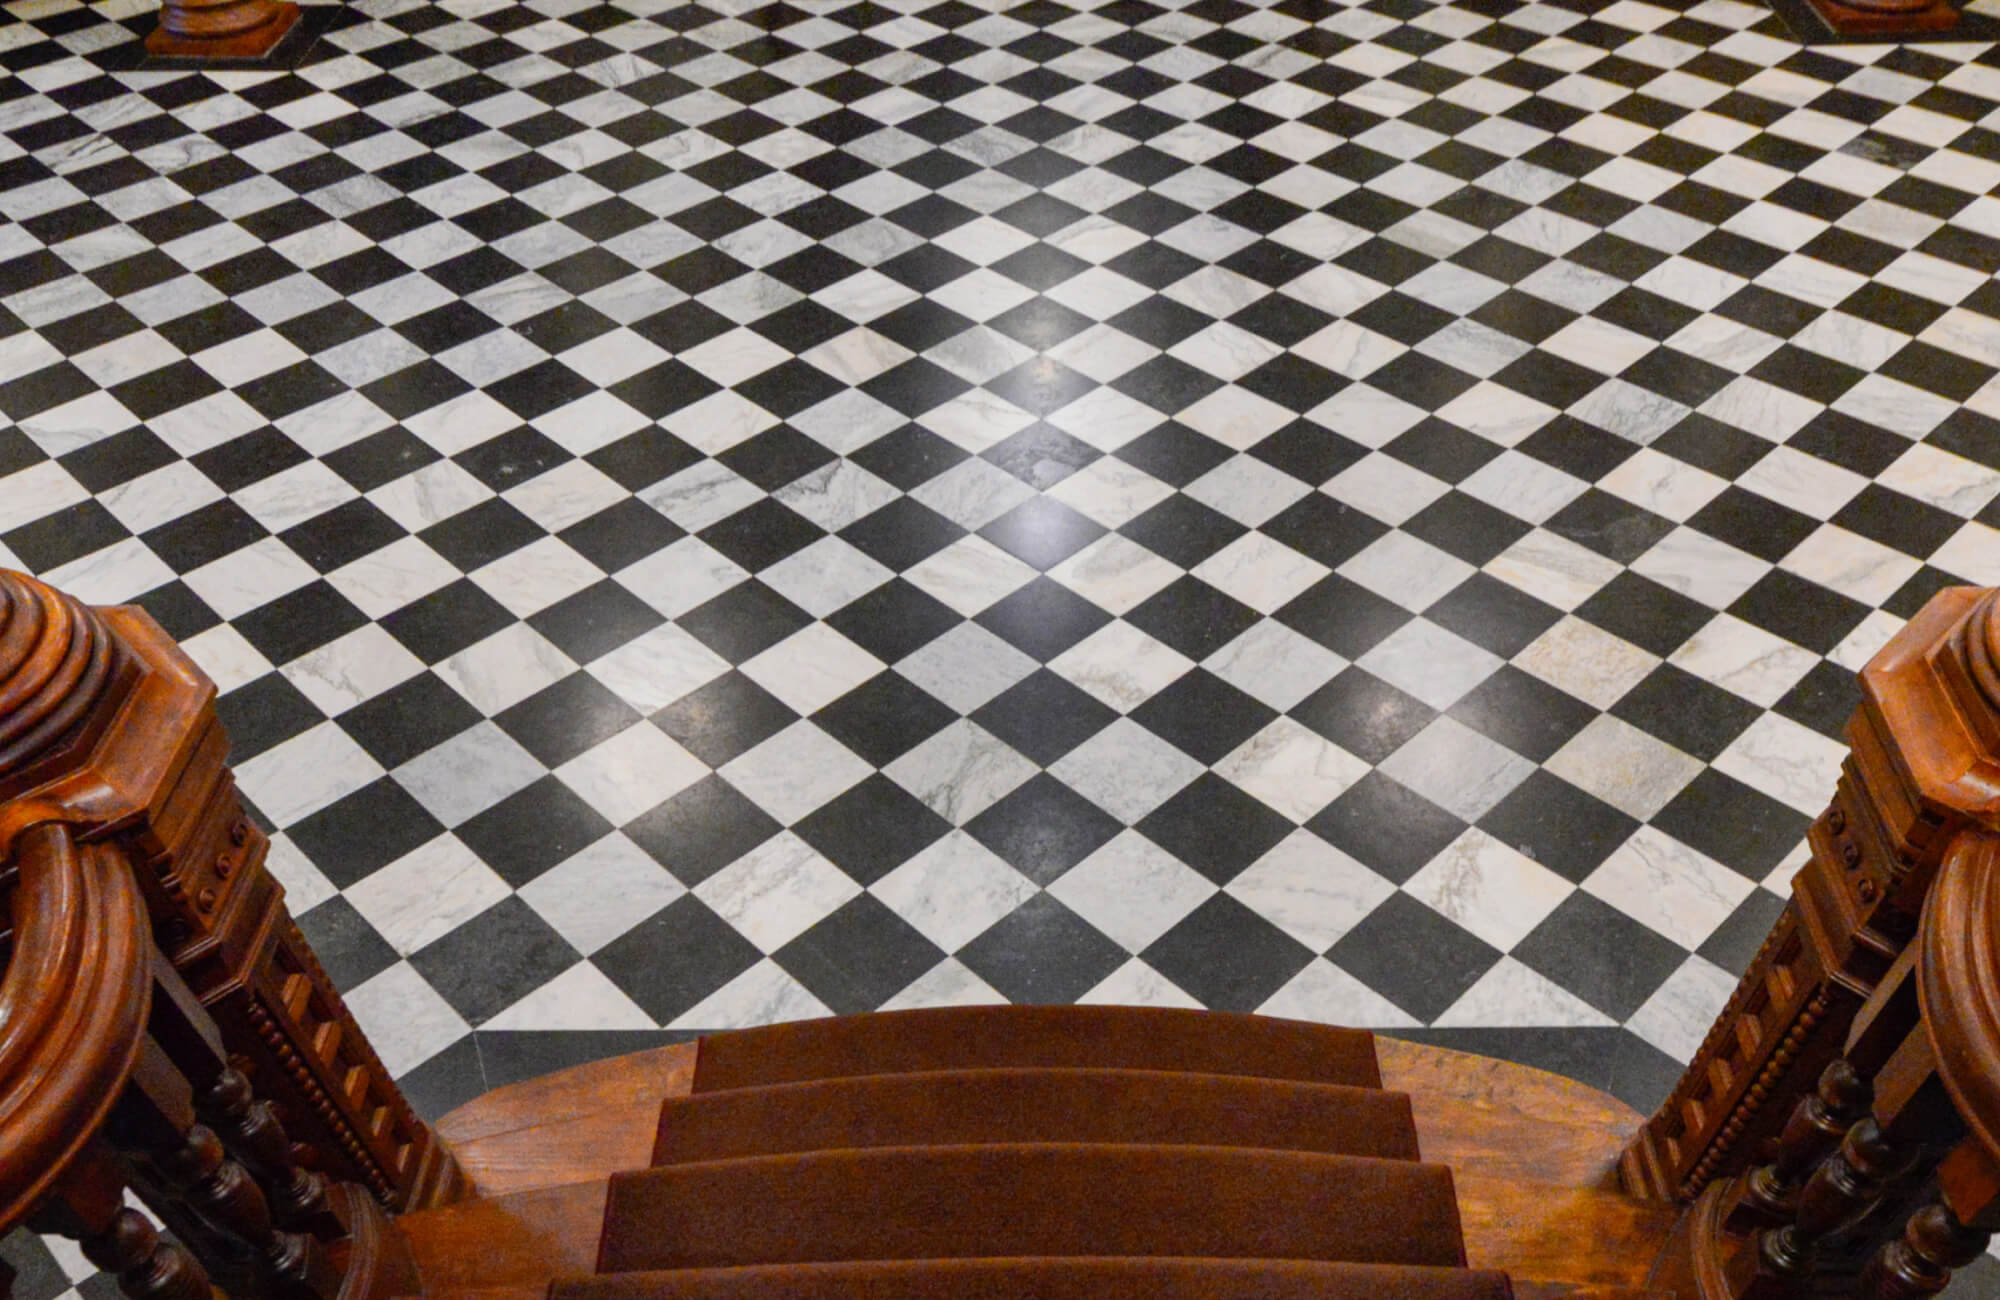 Grand foyer with classic black and white checkered marble floor, viewed from a descending wooden staircase.